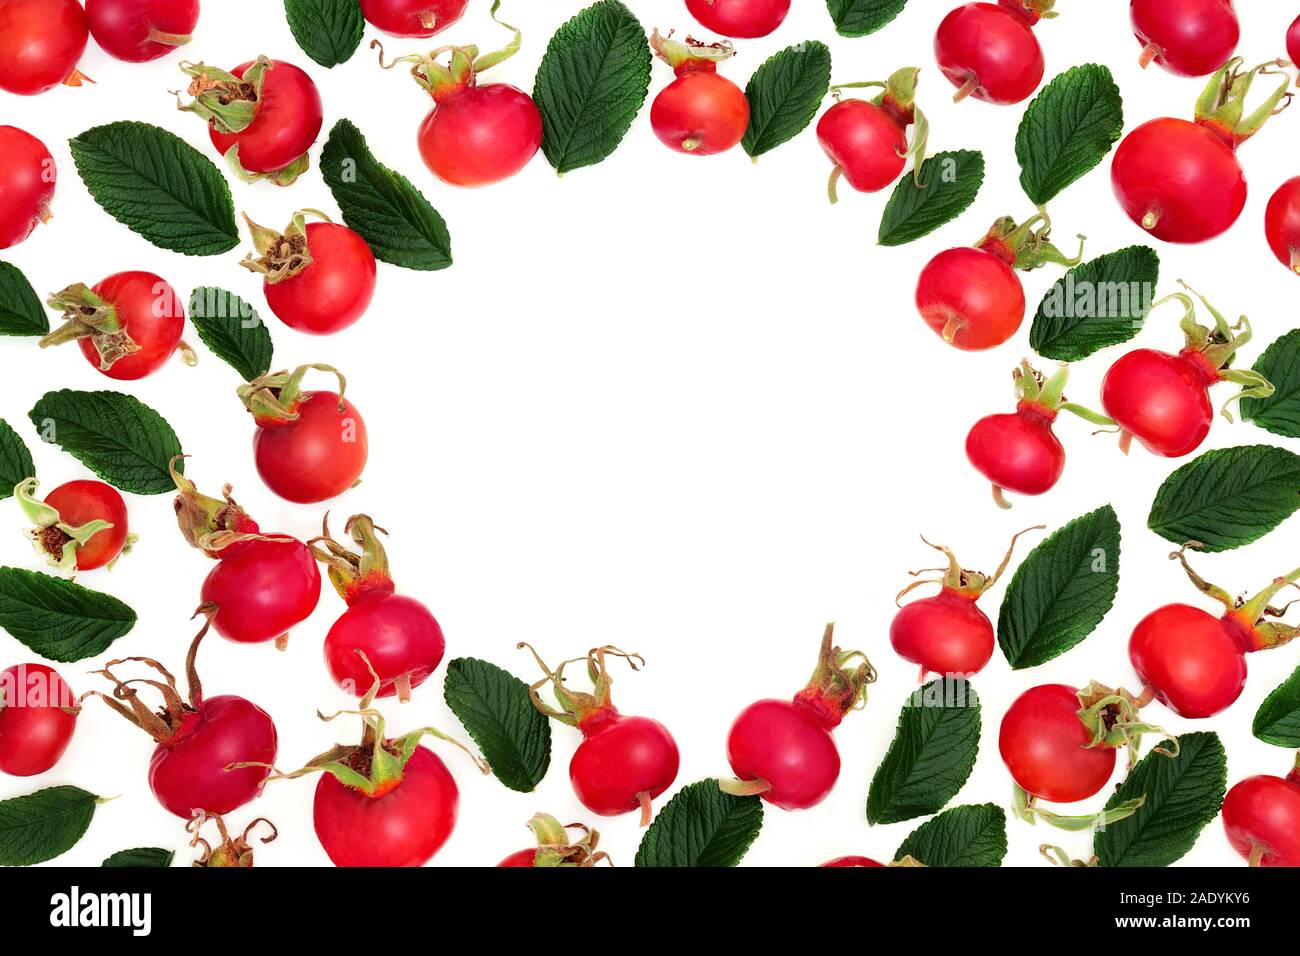 Rosehip berry fruit forming an abstract border on white background with copy space. Very high in vitamin c and antioxidants. Rose rugosa. Stock Photo